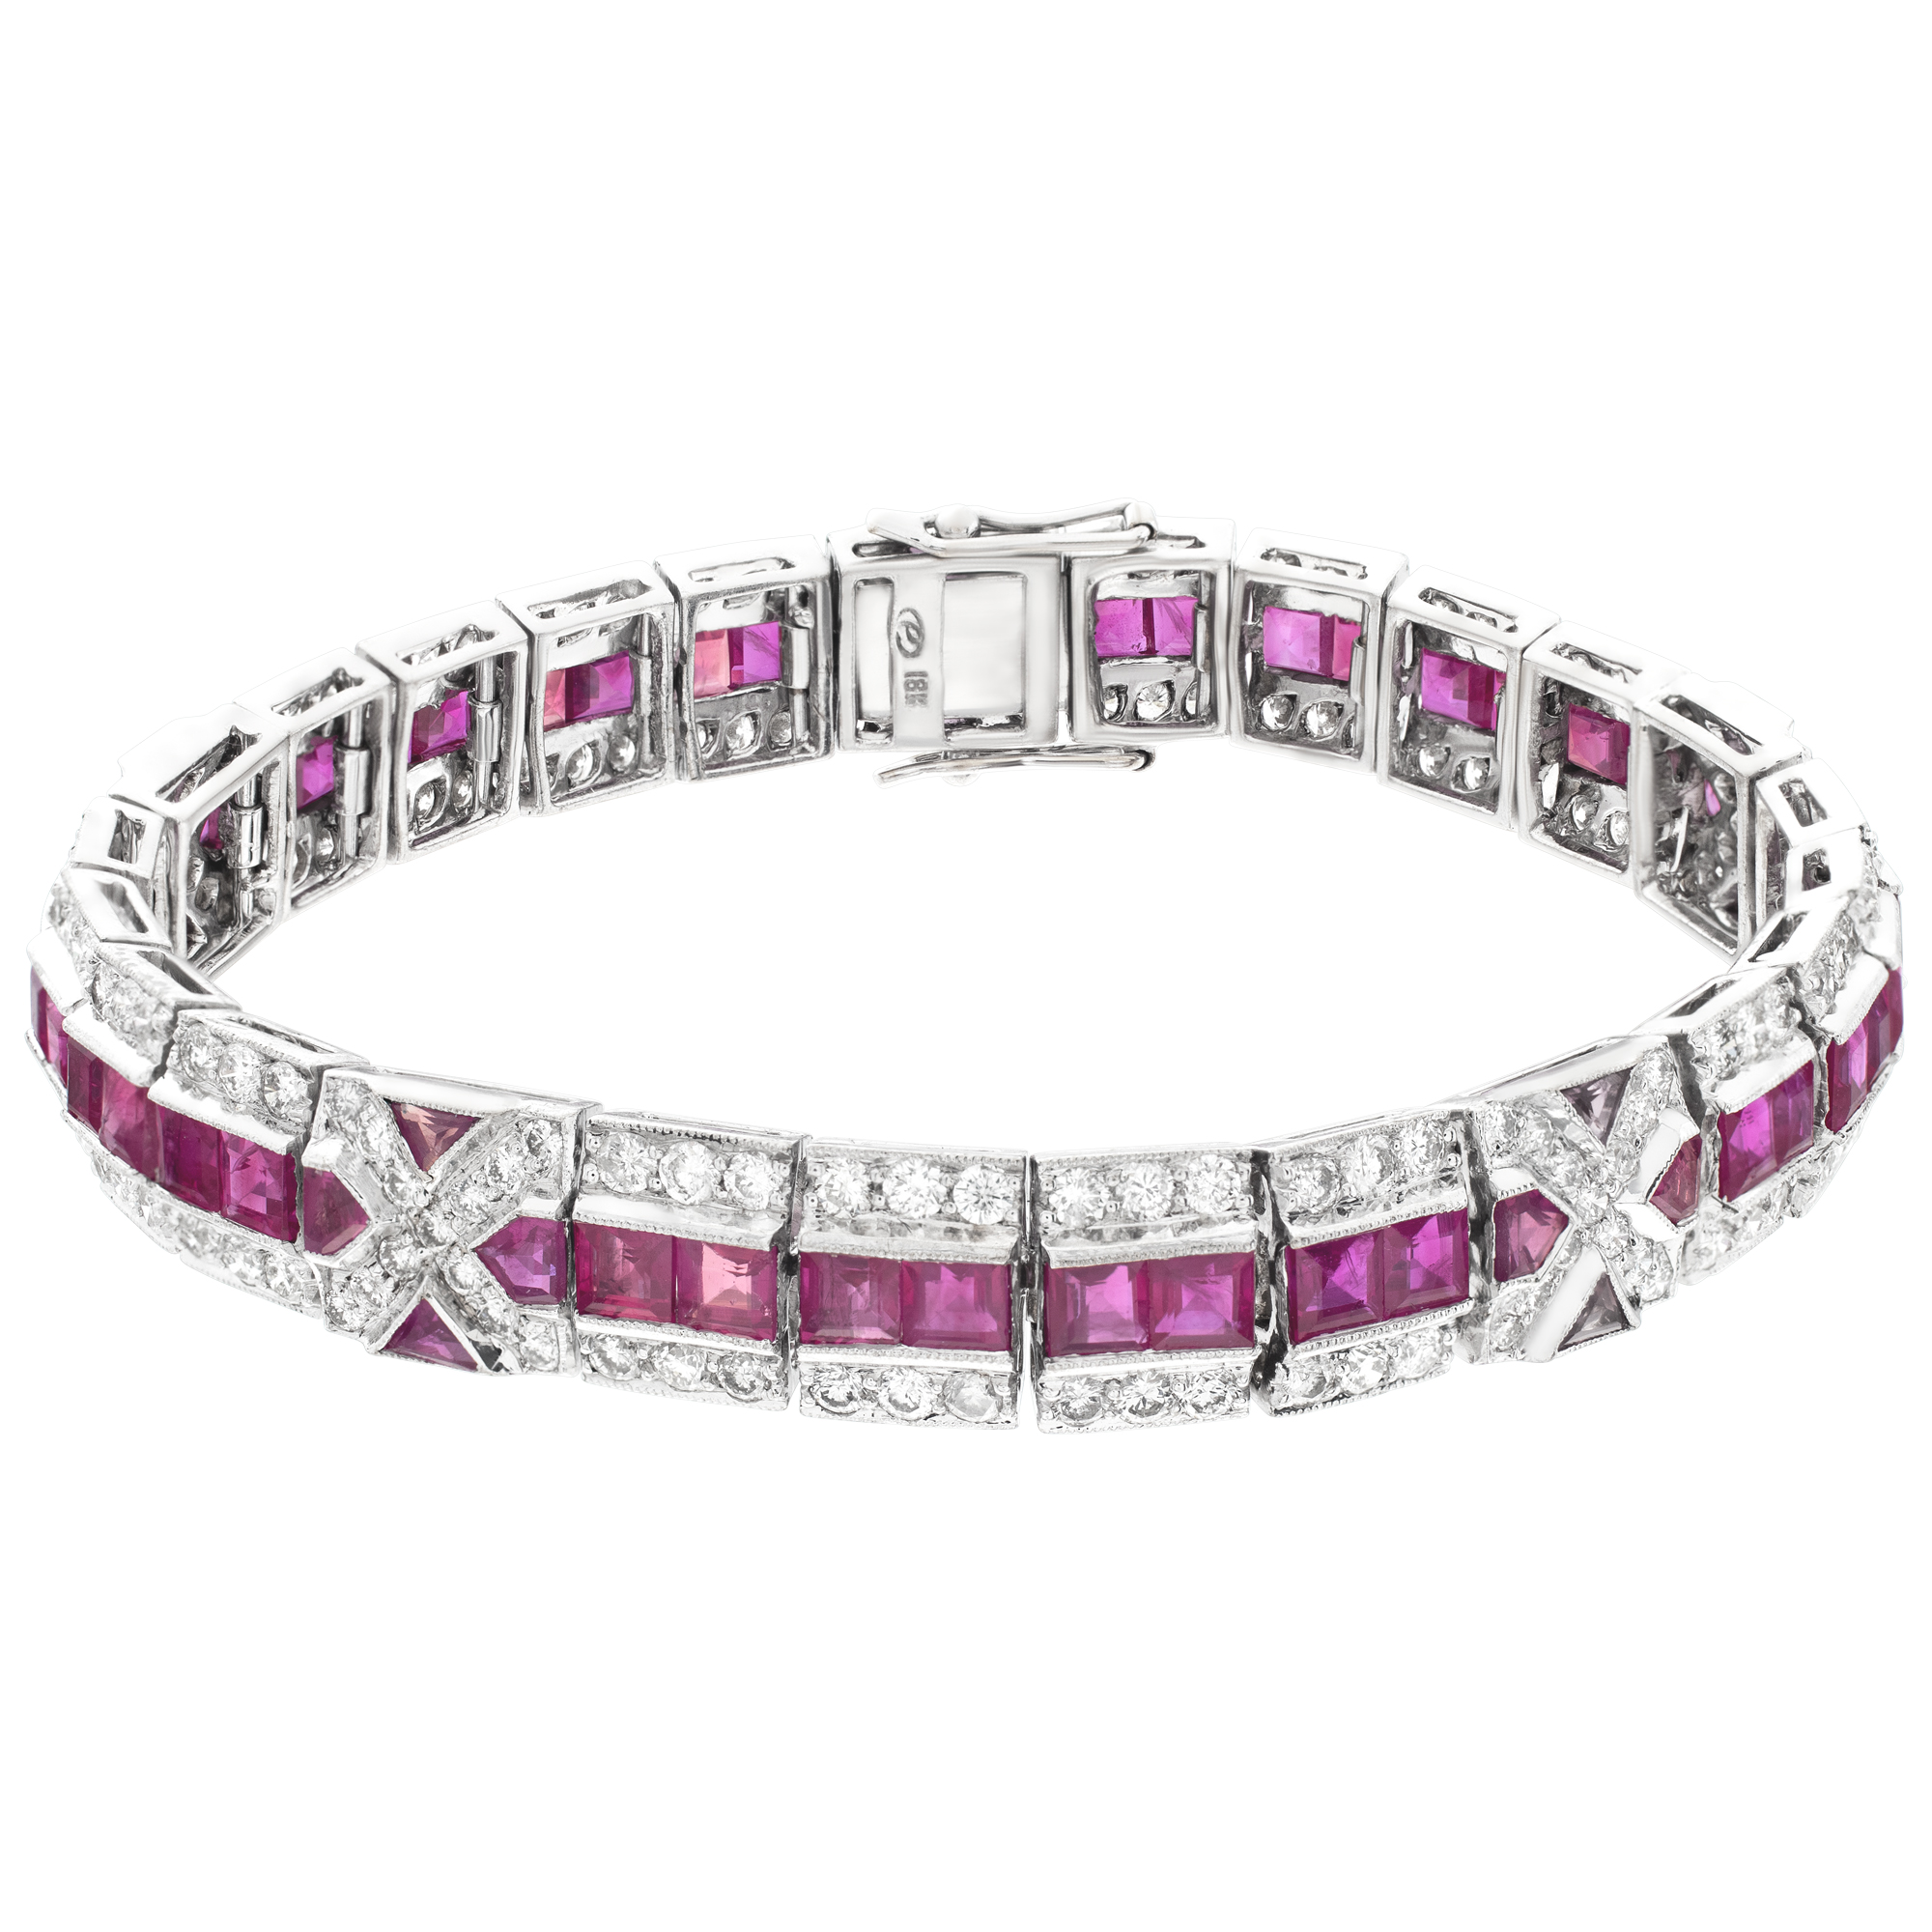 Diamond and rubies bracelet in 18K white gold. Round brilliant cut diamonds total approx. weight: 4.82 carats,